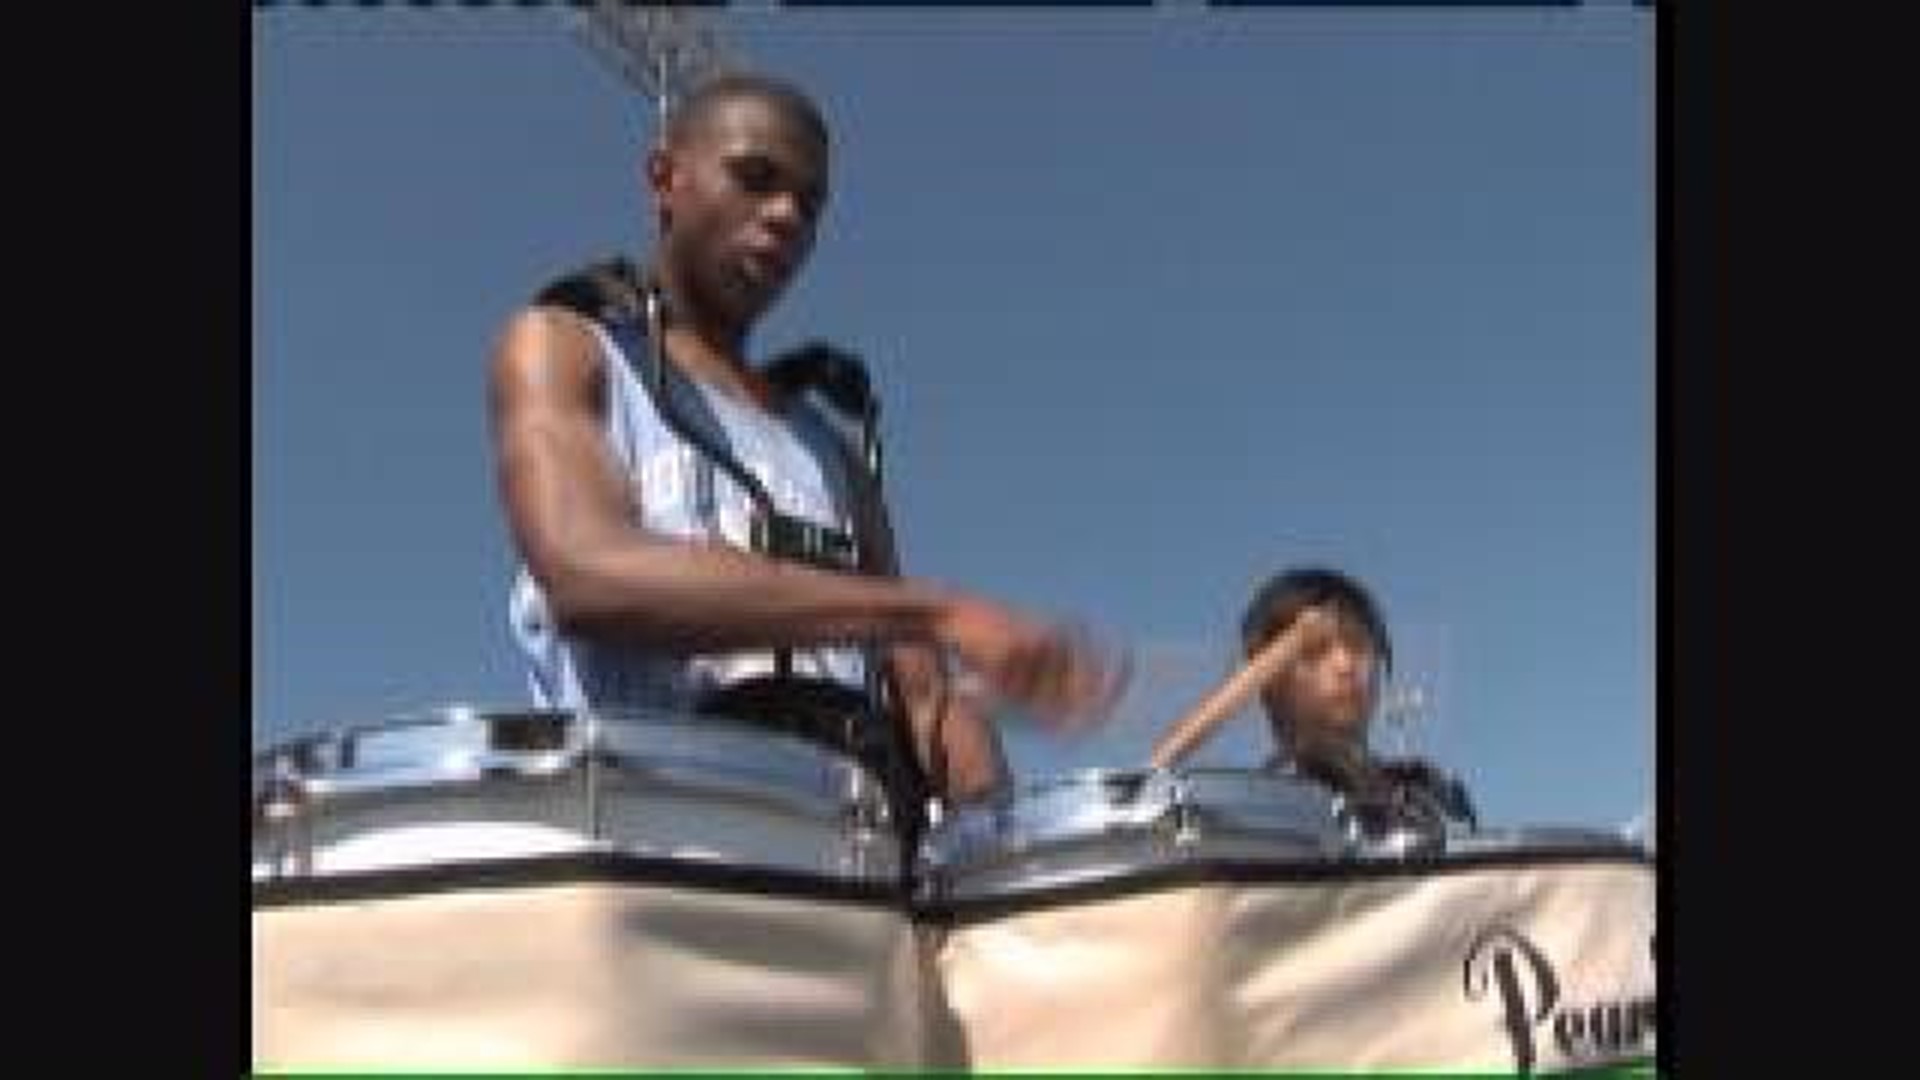 Band Parents May File Lawsuit